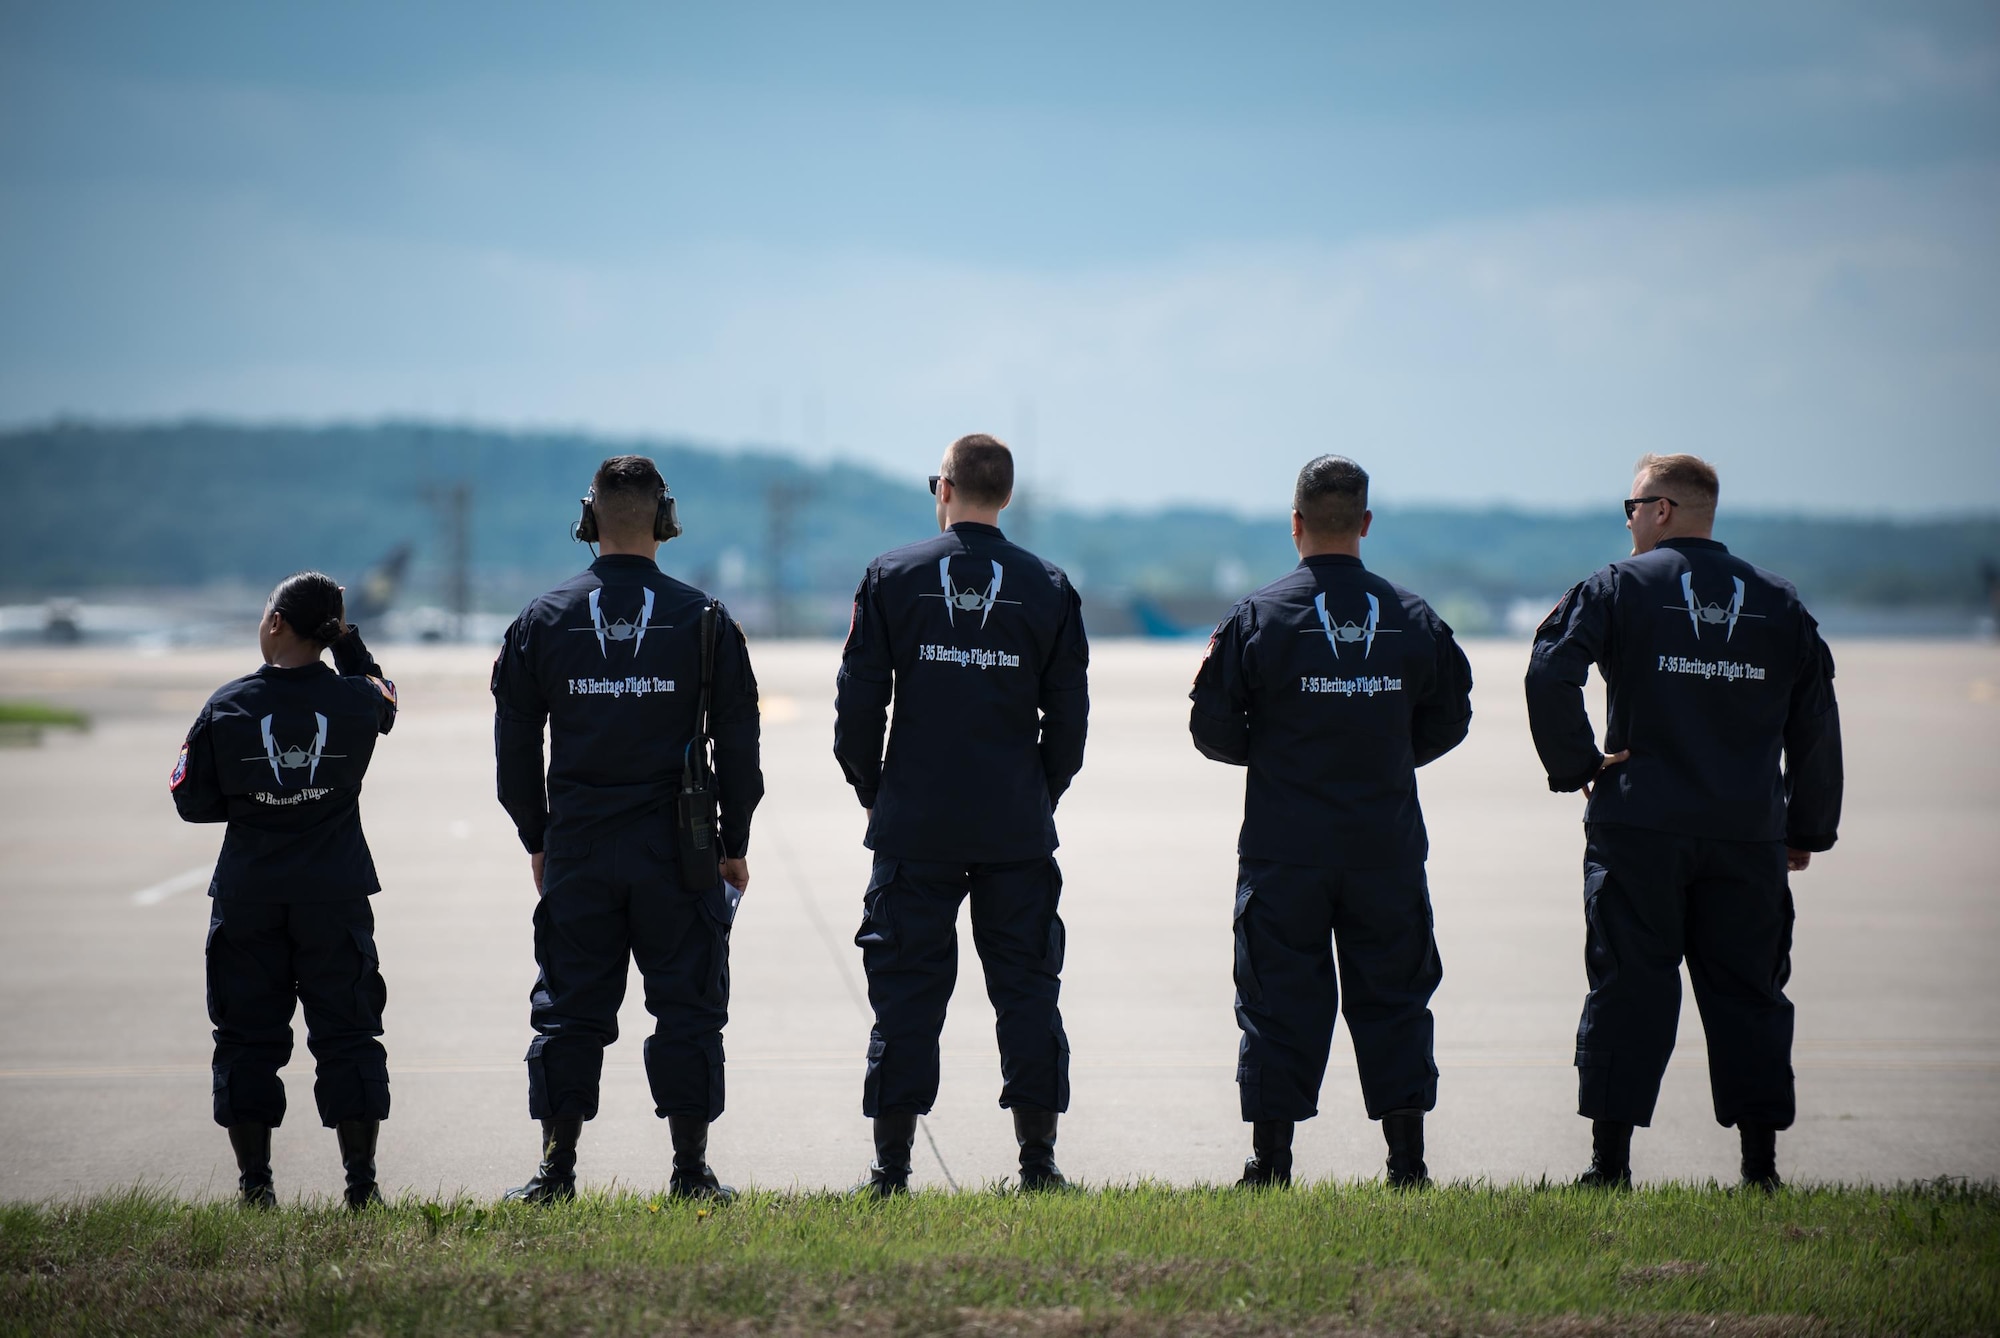 Maintenance crew await the arrival of U.S. Air Force Lightning II fighter aircraft at the Kentucky Air National Guard Base in Louisville, Ky., April 20, 2017, in preparation for the Thunder Over Louisville air show. The Kentucky Air Guard is once again serving as the base of operations for military aircraft performing in the show. (U.S. Air National Guard photo by Lt. Col. Dale Greer)